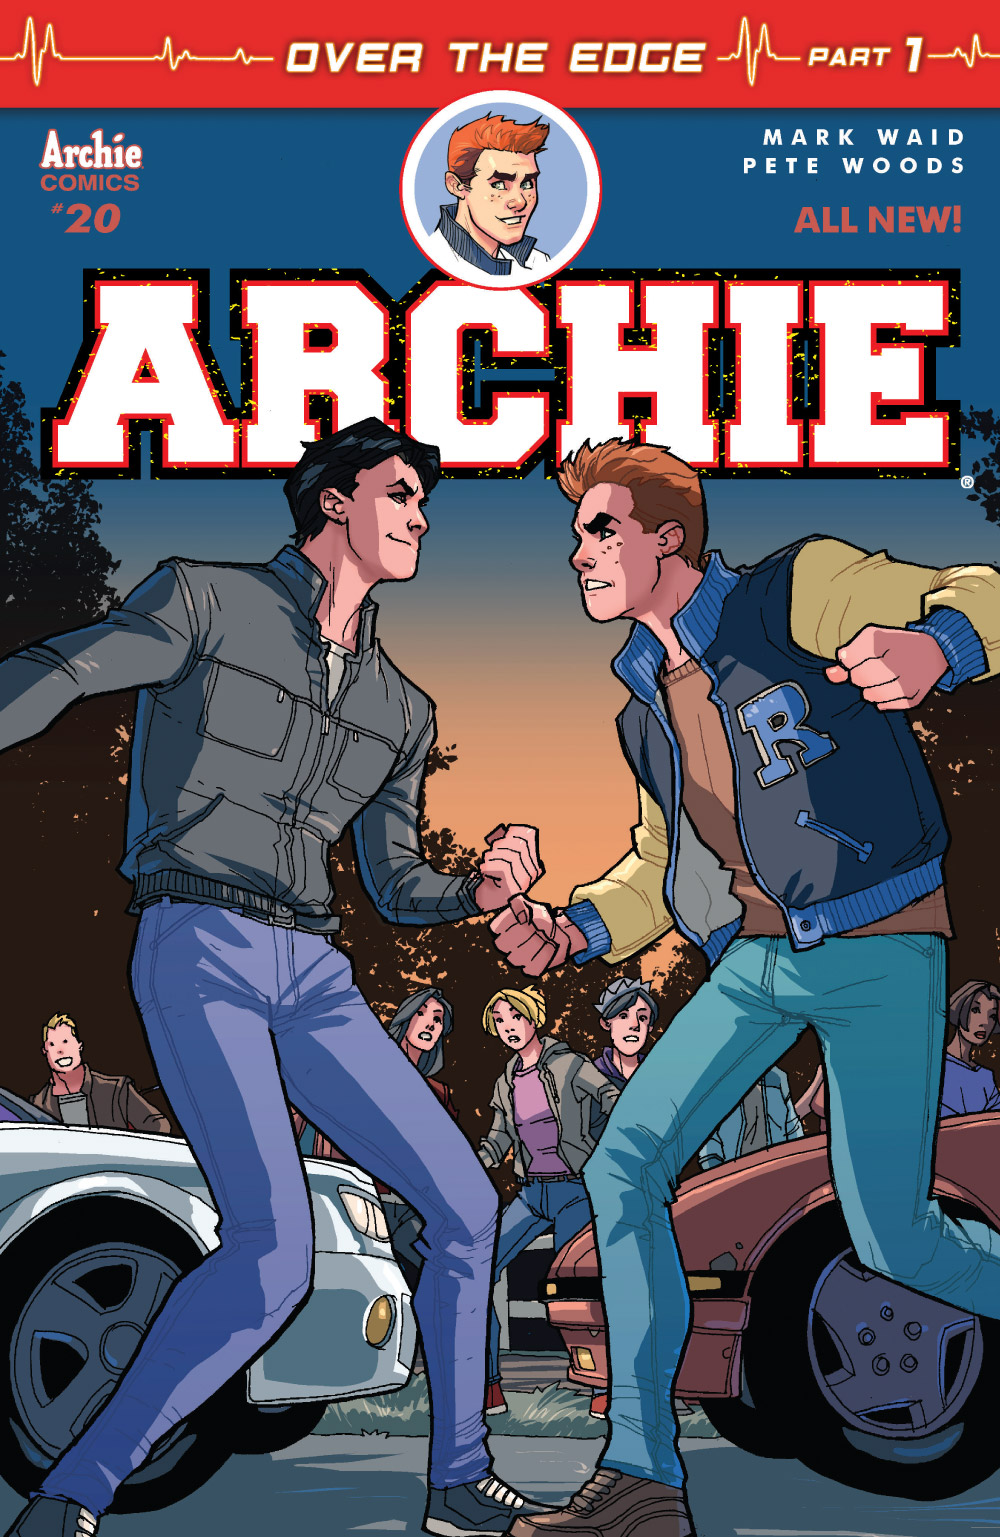 Archie #20 Review